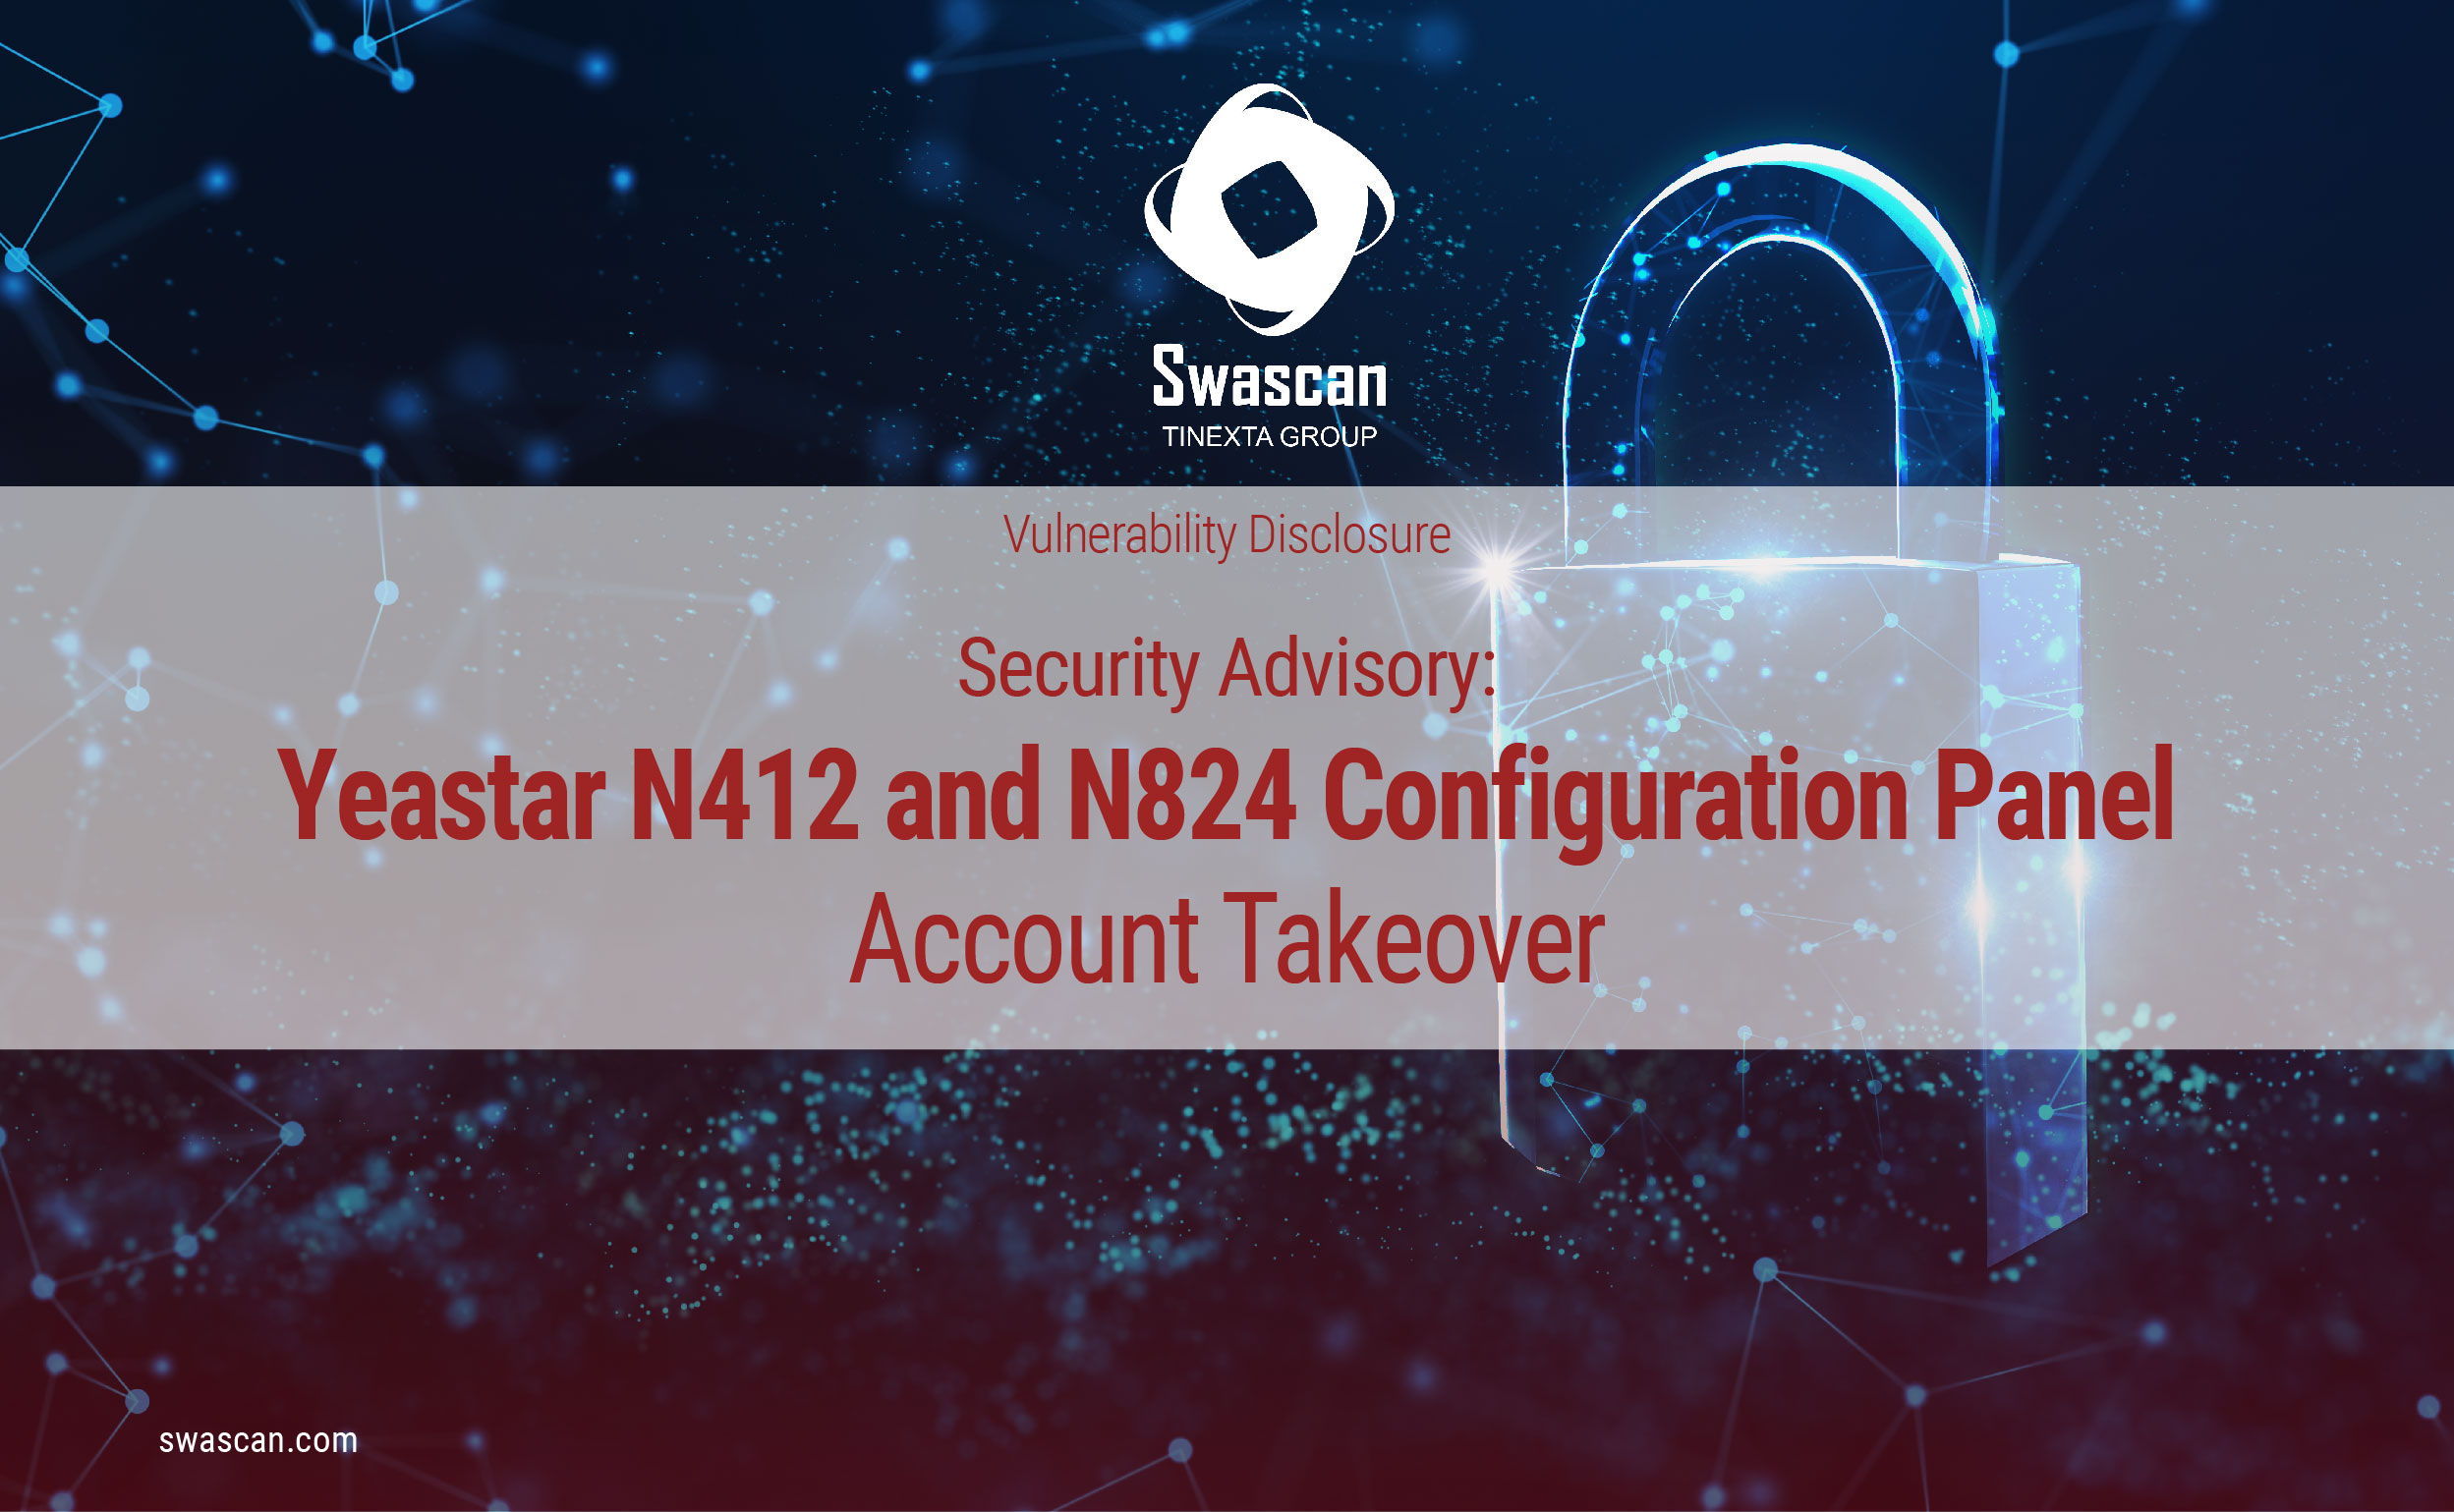 Security Advisory: Yeastar N412 and N824 Configuration Panel Account Takeover (CVE-2022-47732)